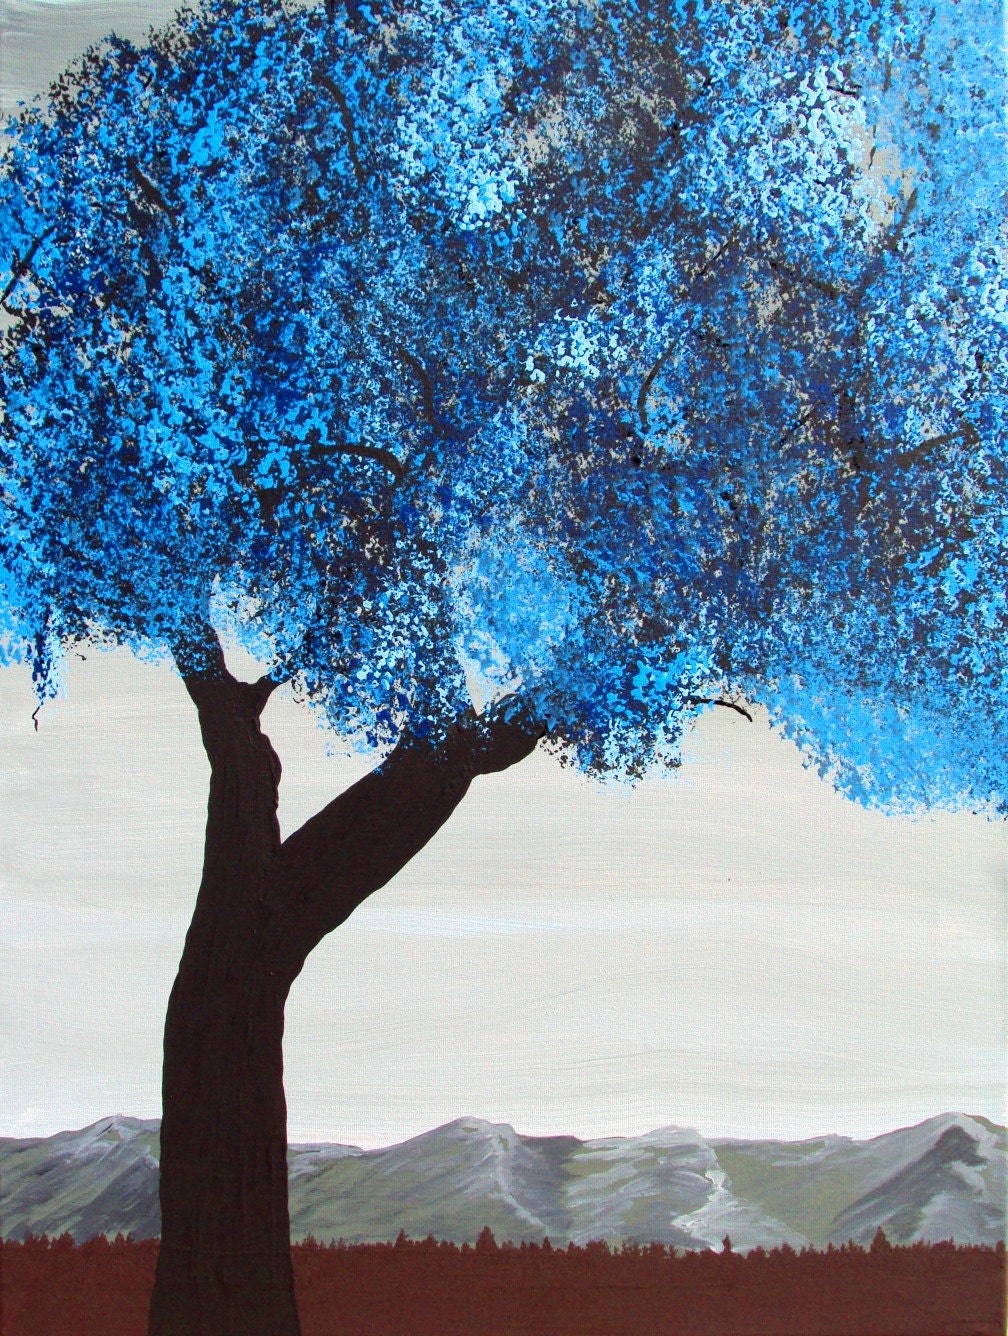 Free US Shipping - Winter Blues by Bryan Dubreuiel - Original Painting - Tree - 24 by 18